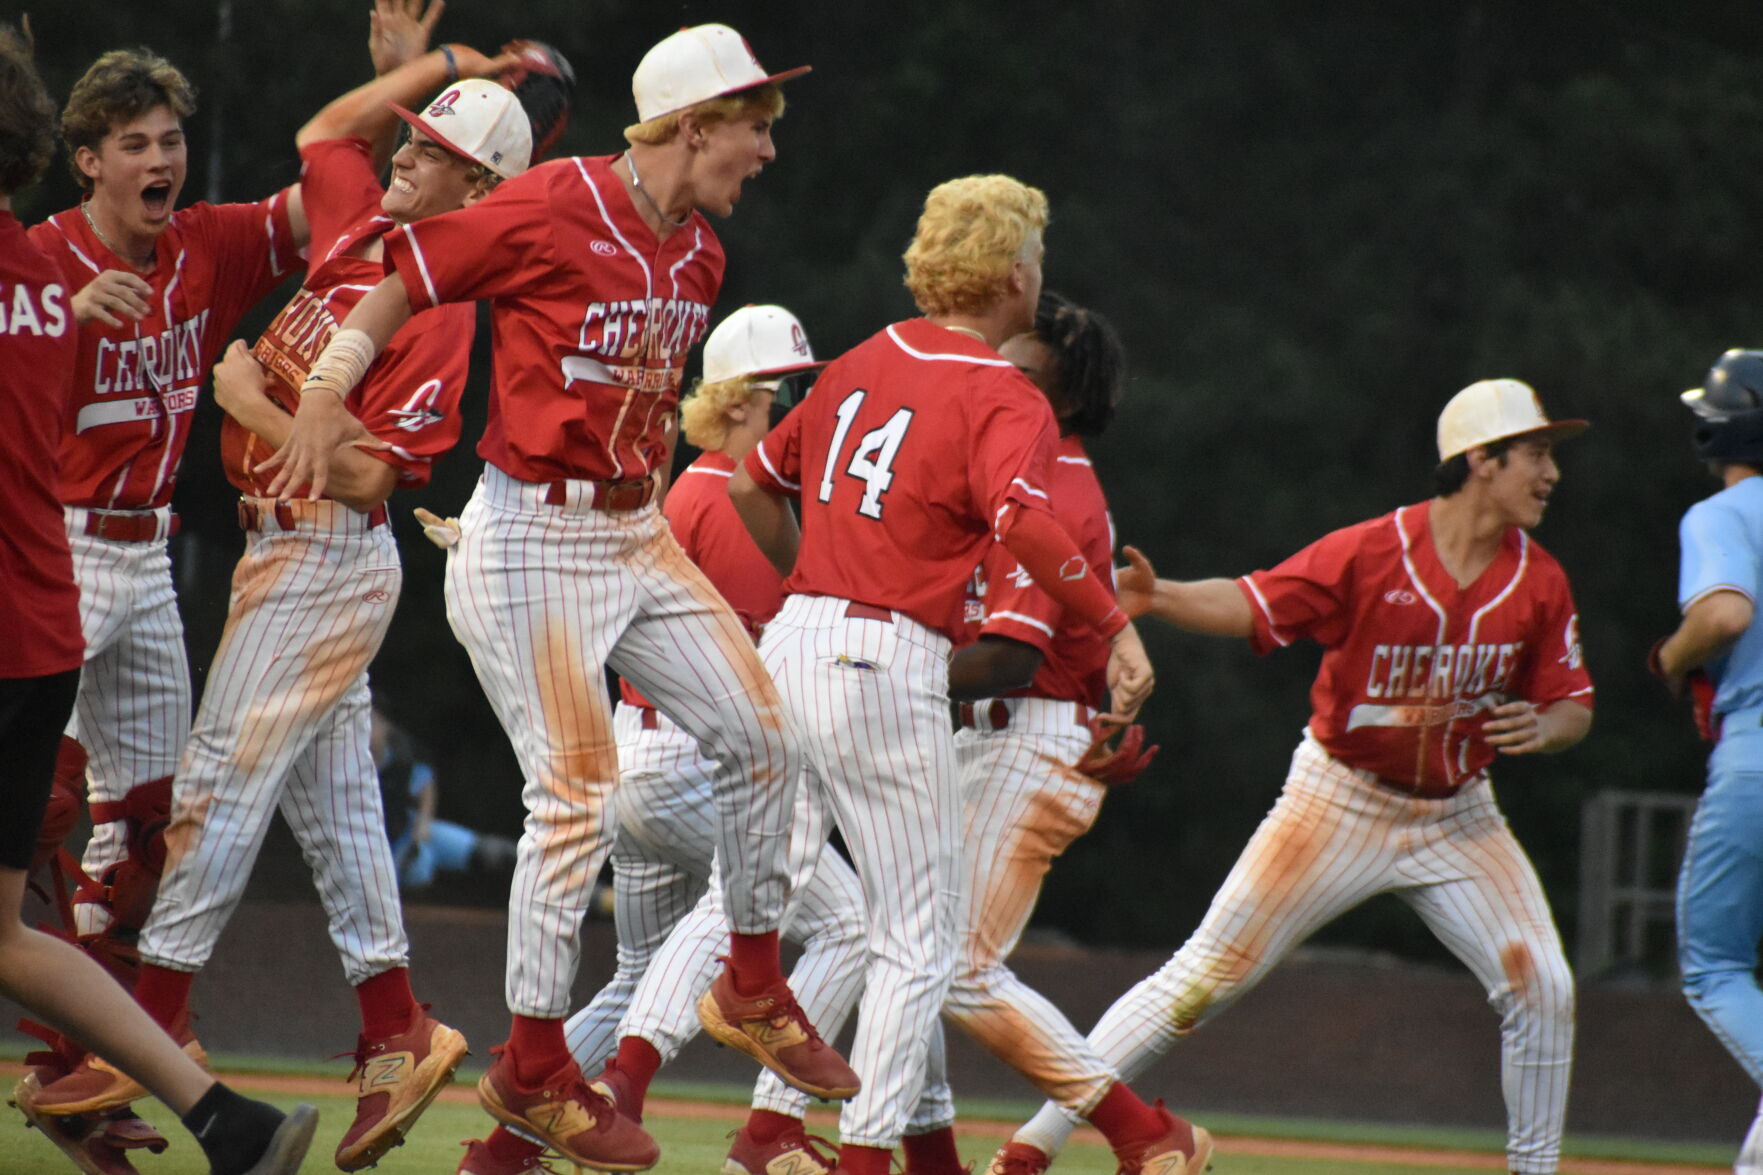 Cherokee Warriors Triumph Over Hawks, Secure Sweet 16 Spot in Extra-Inning Thriller